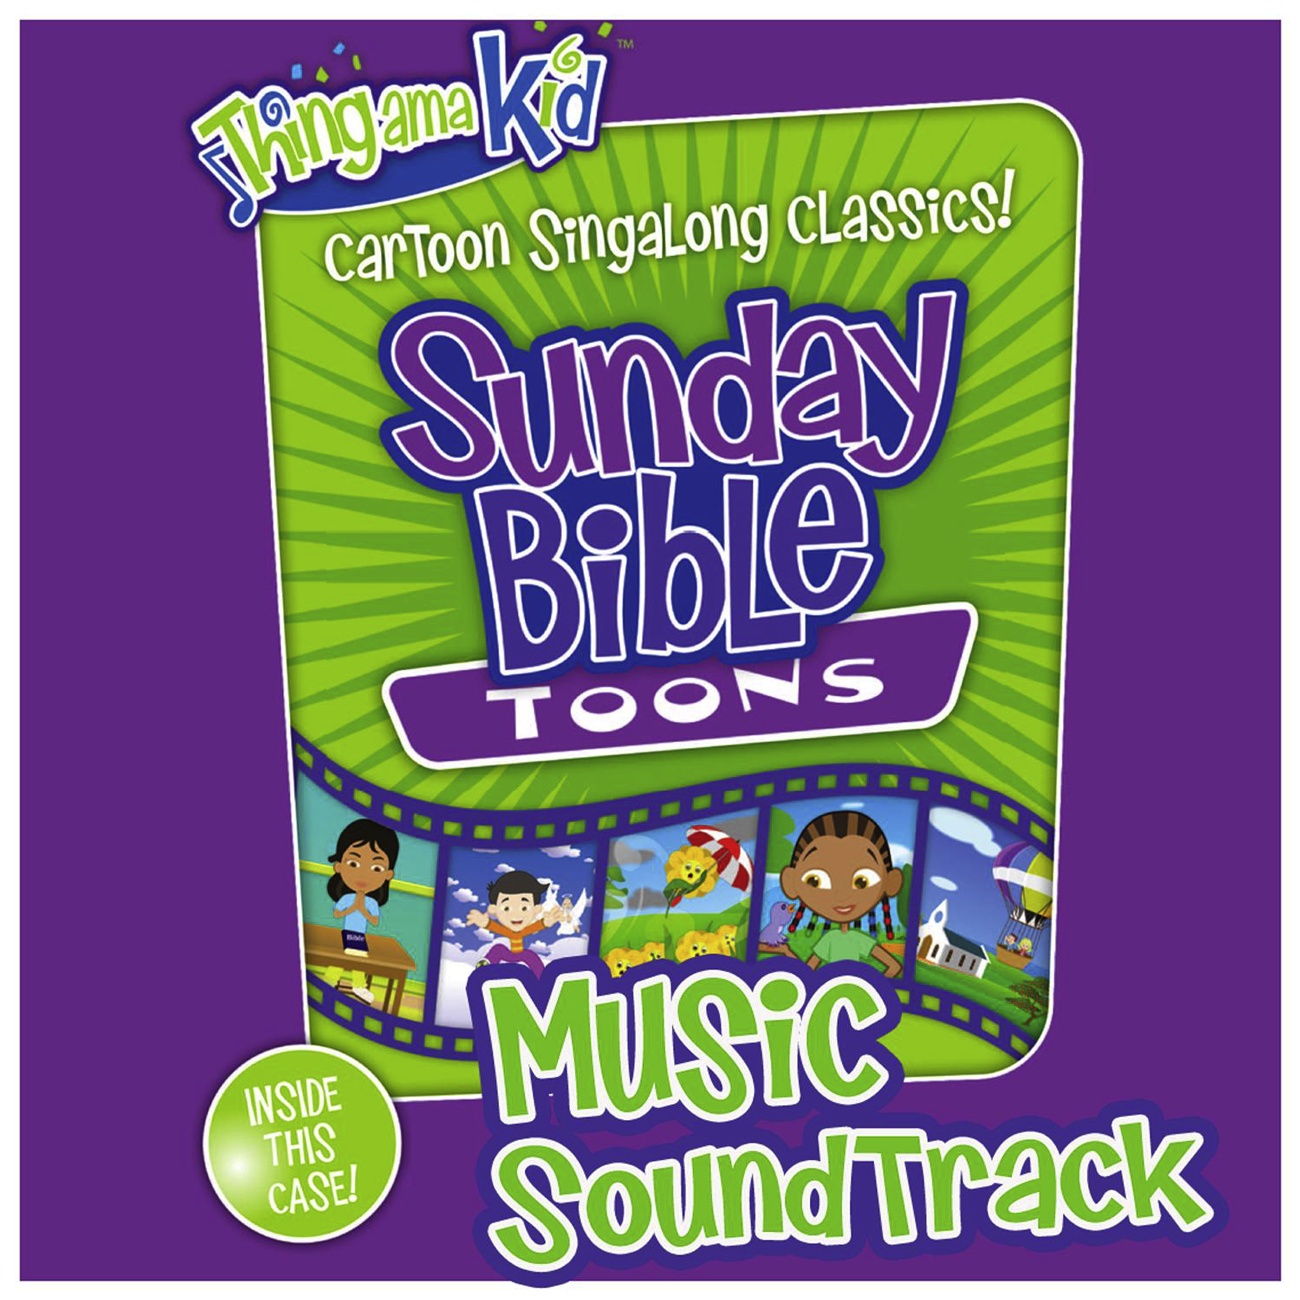 Every Promise In The Book Is Mine (Sunday Bible Toons Music Album Version)